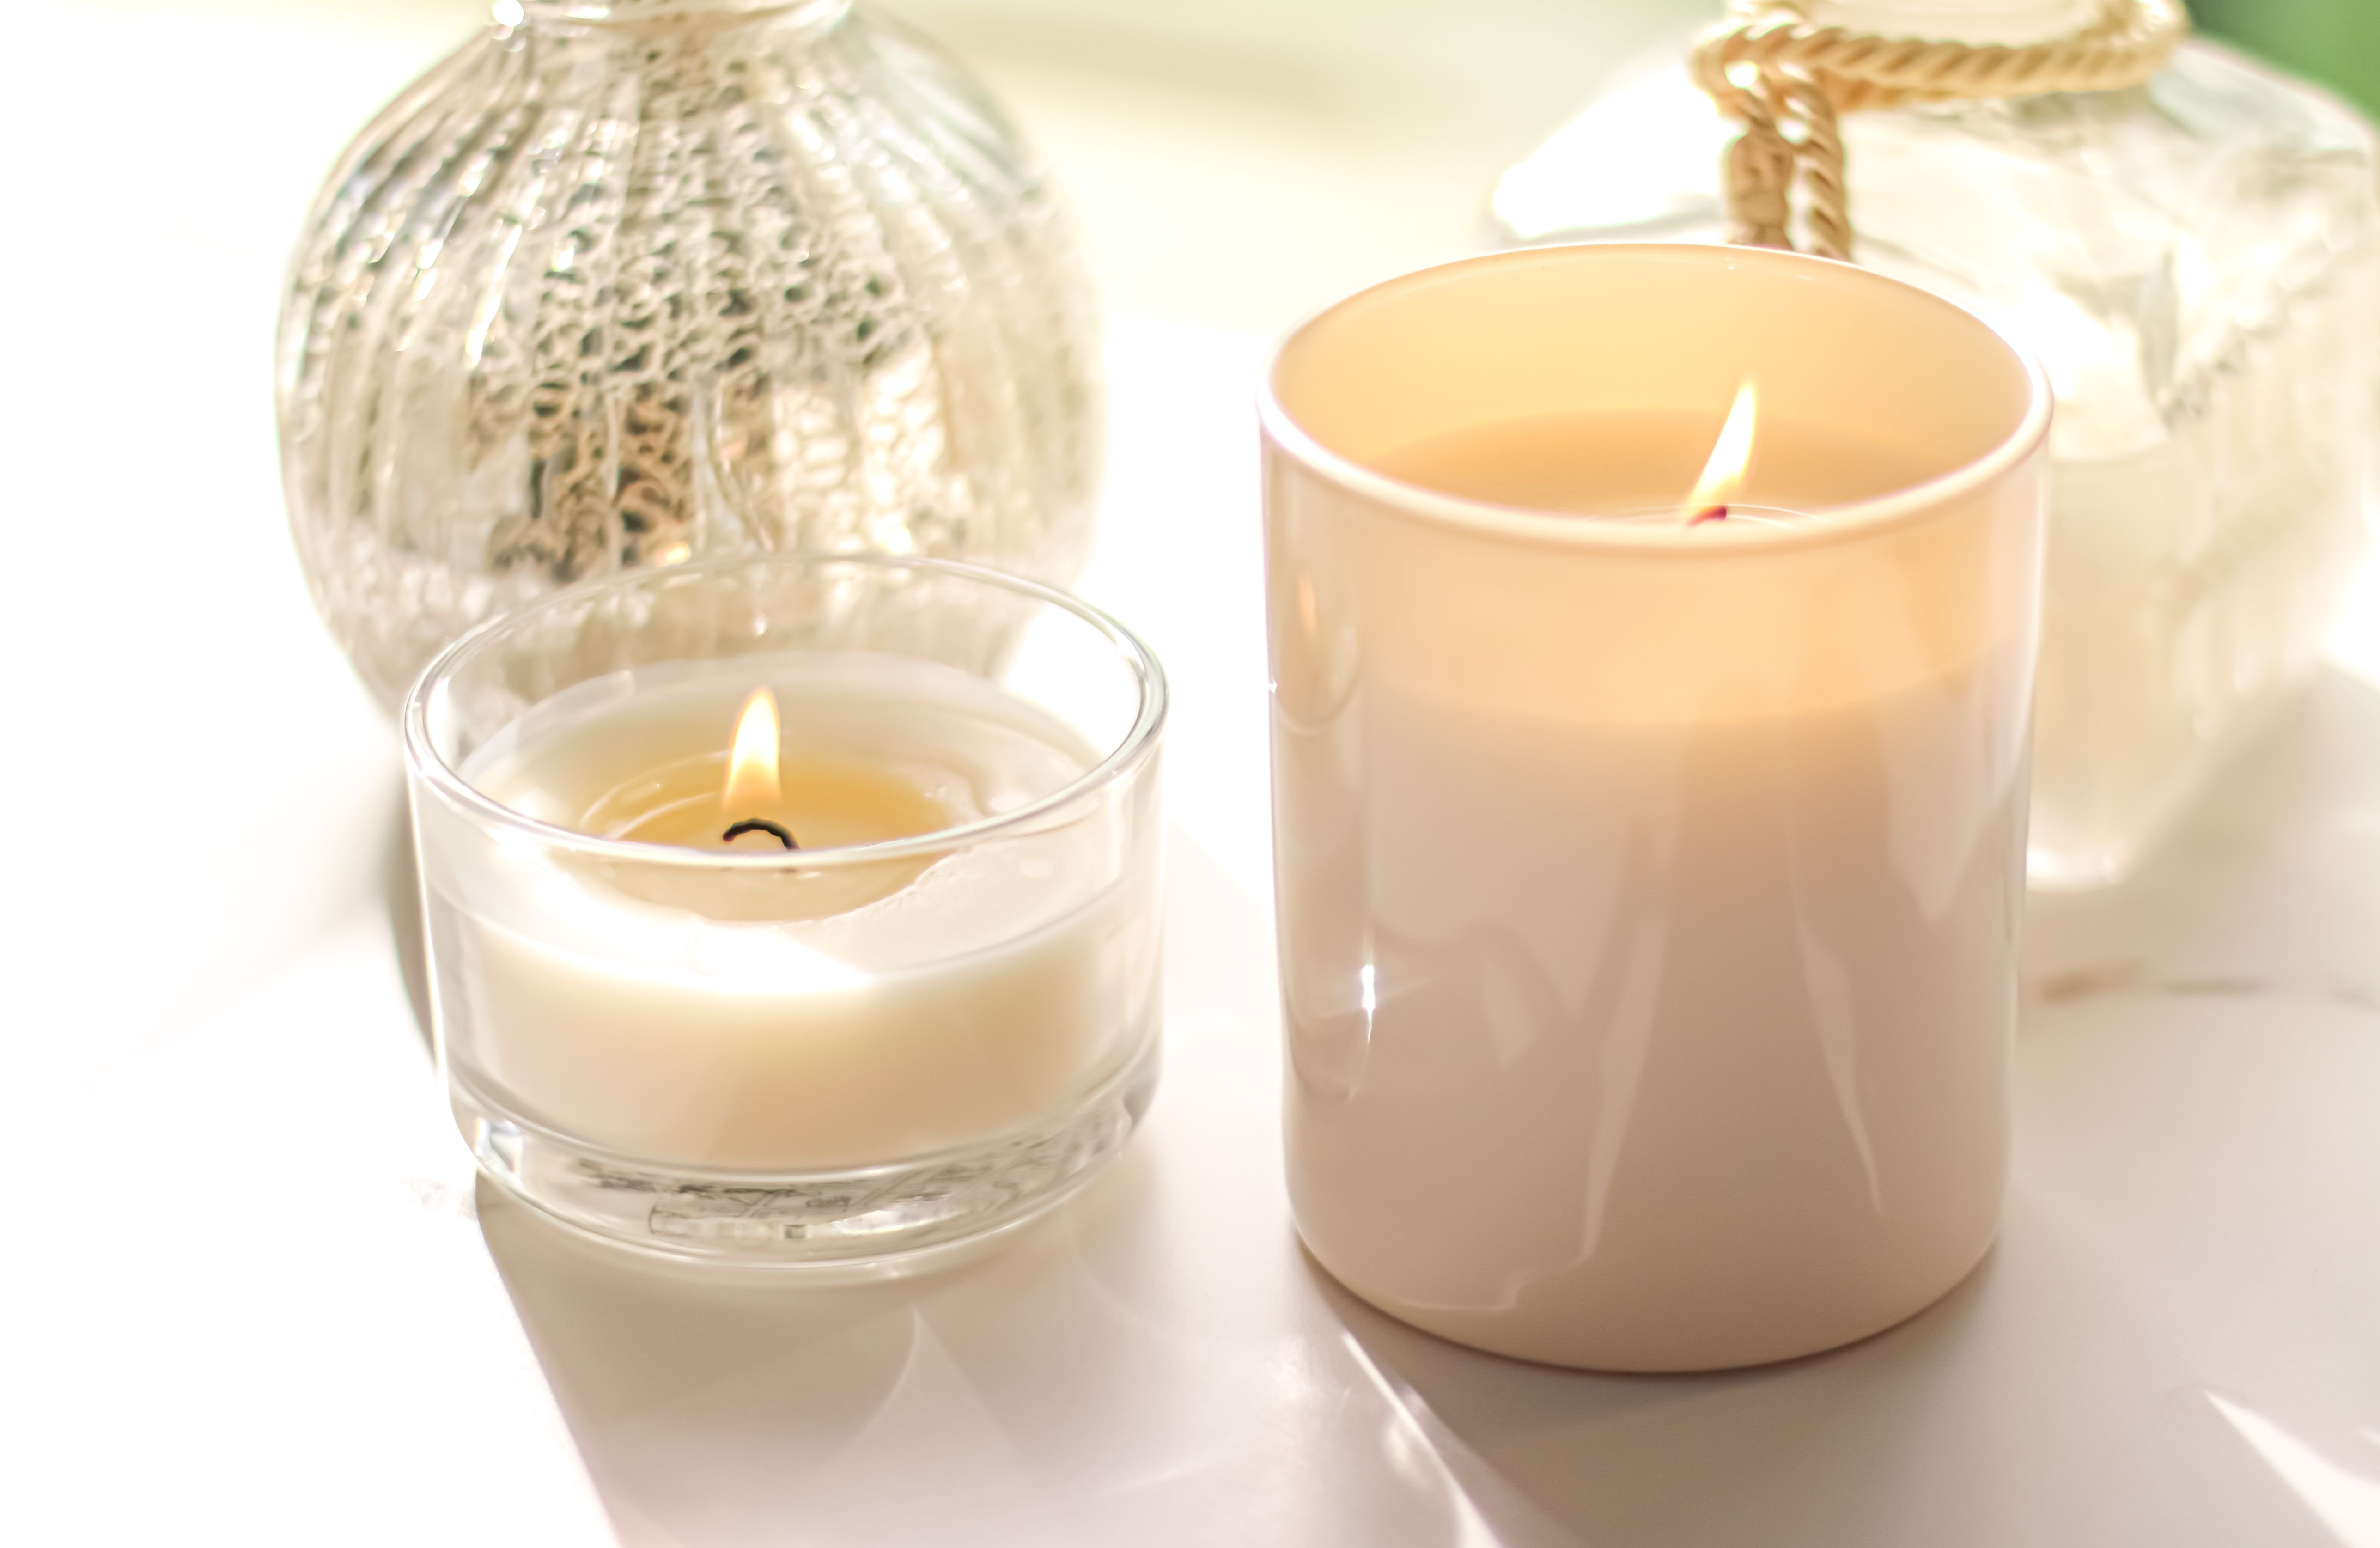 Burning A Candle At Your Home Has Many Health Benefits